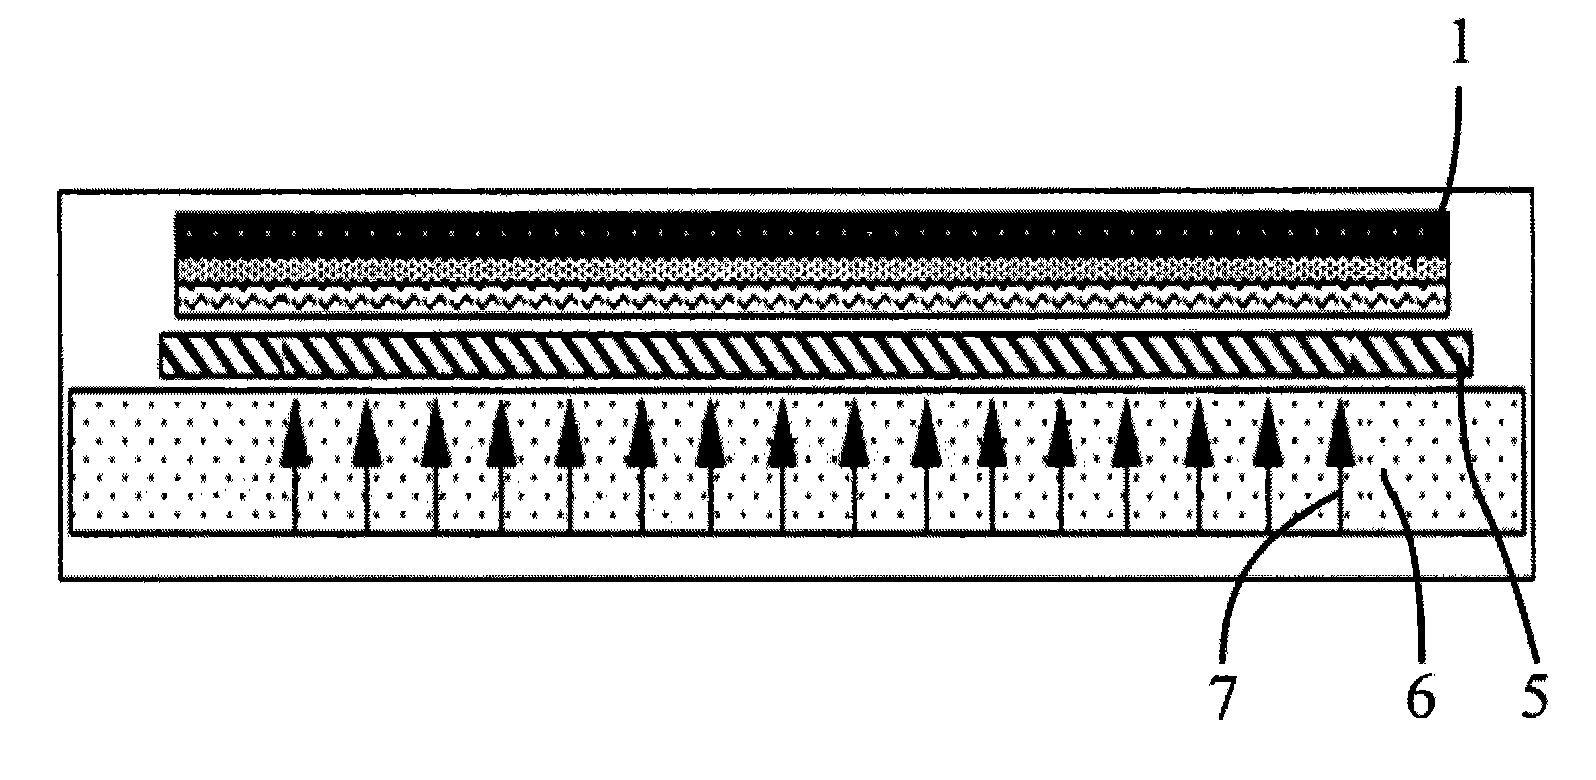 Method for exposing single-sided flexible circuit board